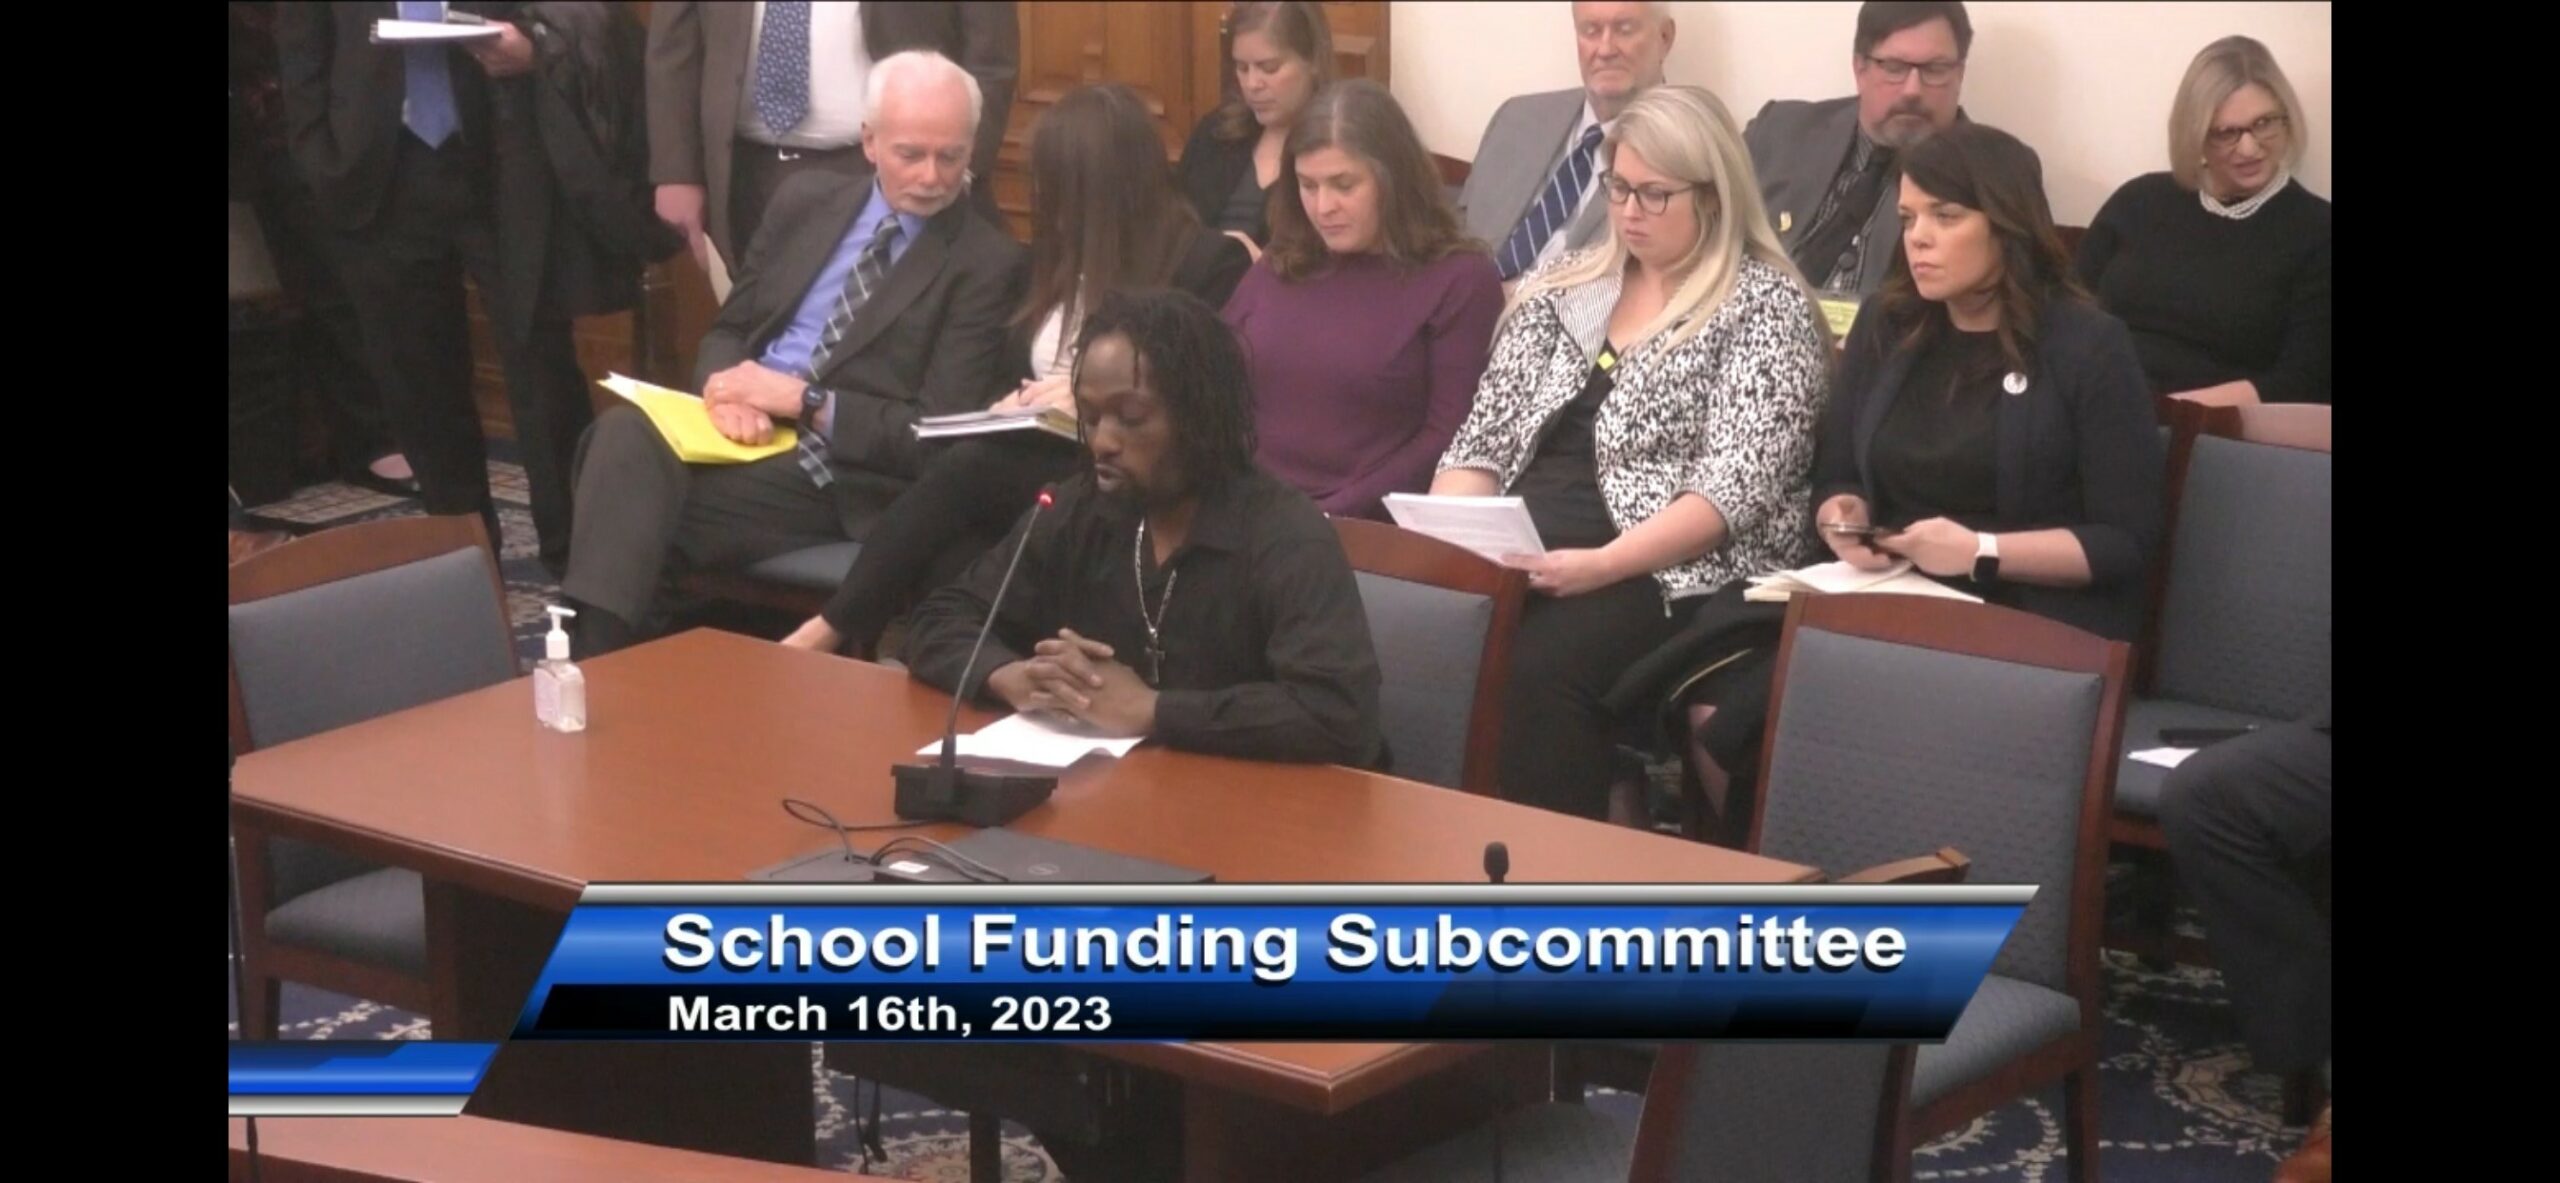 Dontia Dyson’s testimony to the School Funding Subcommittee